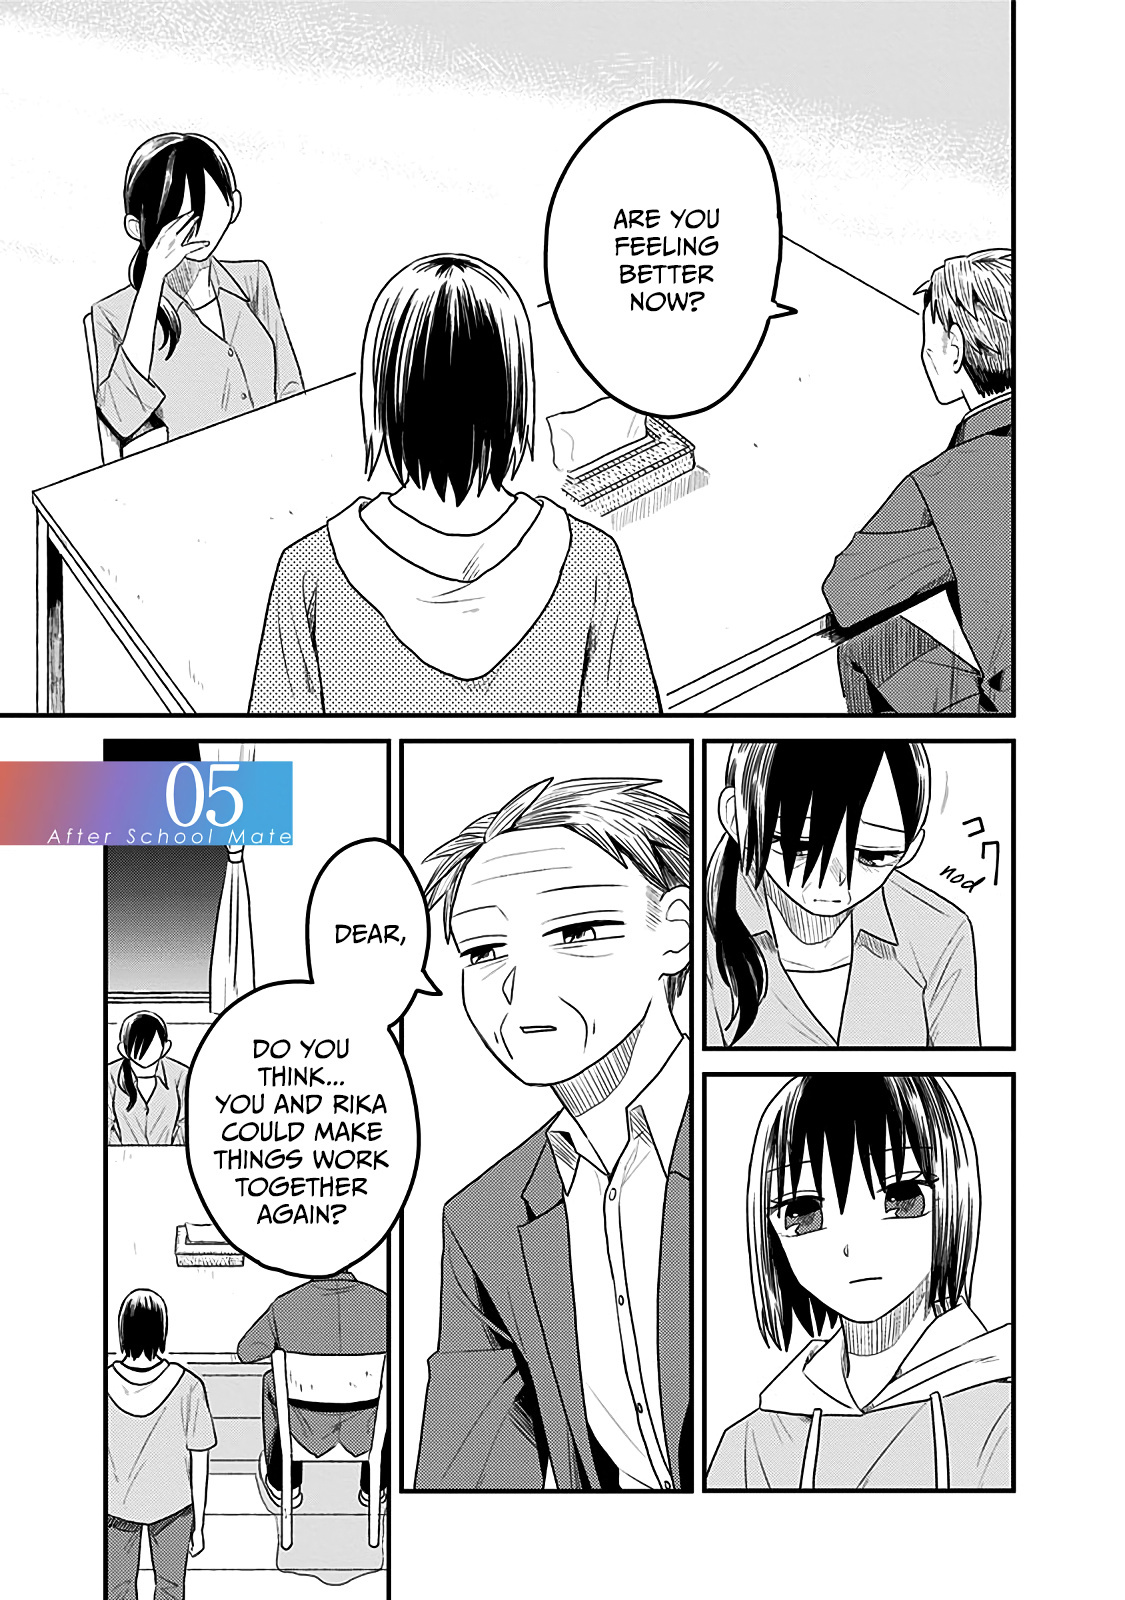 After School Mate - Page 1